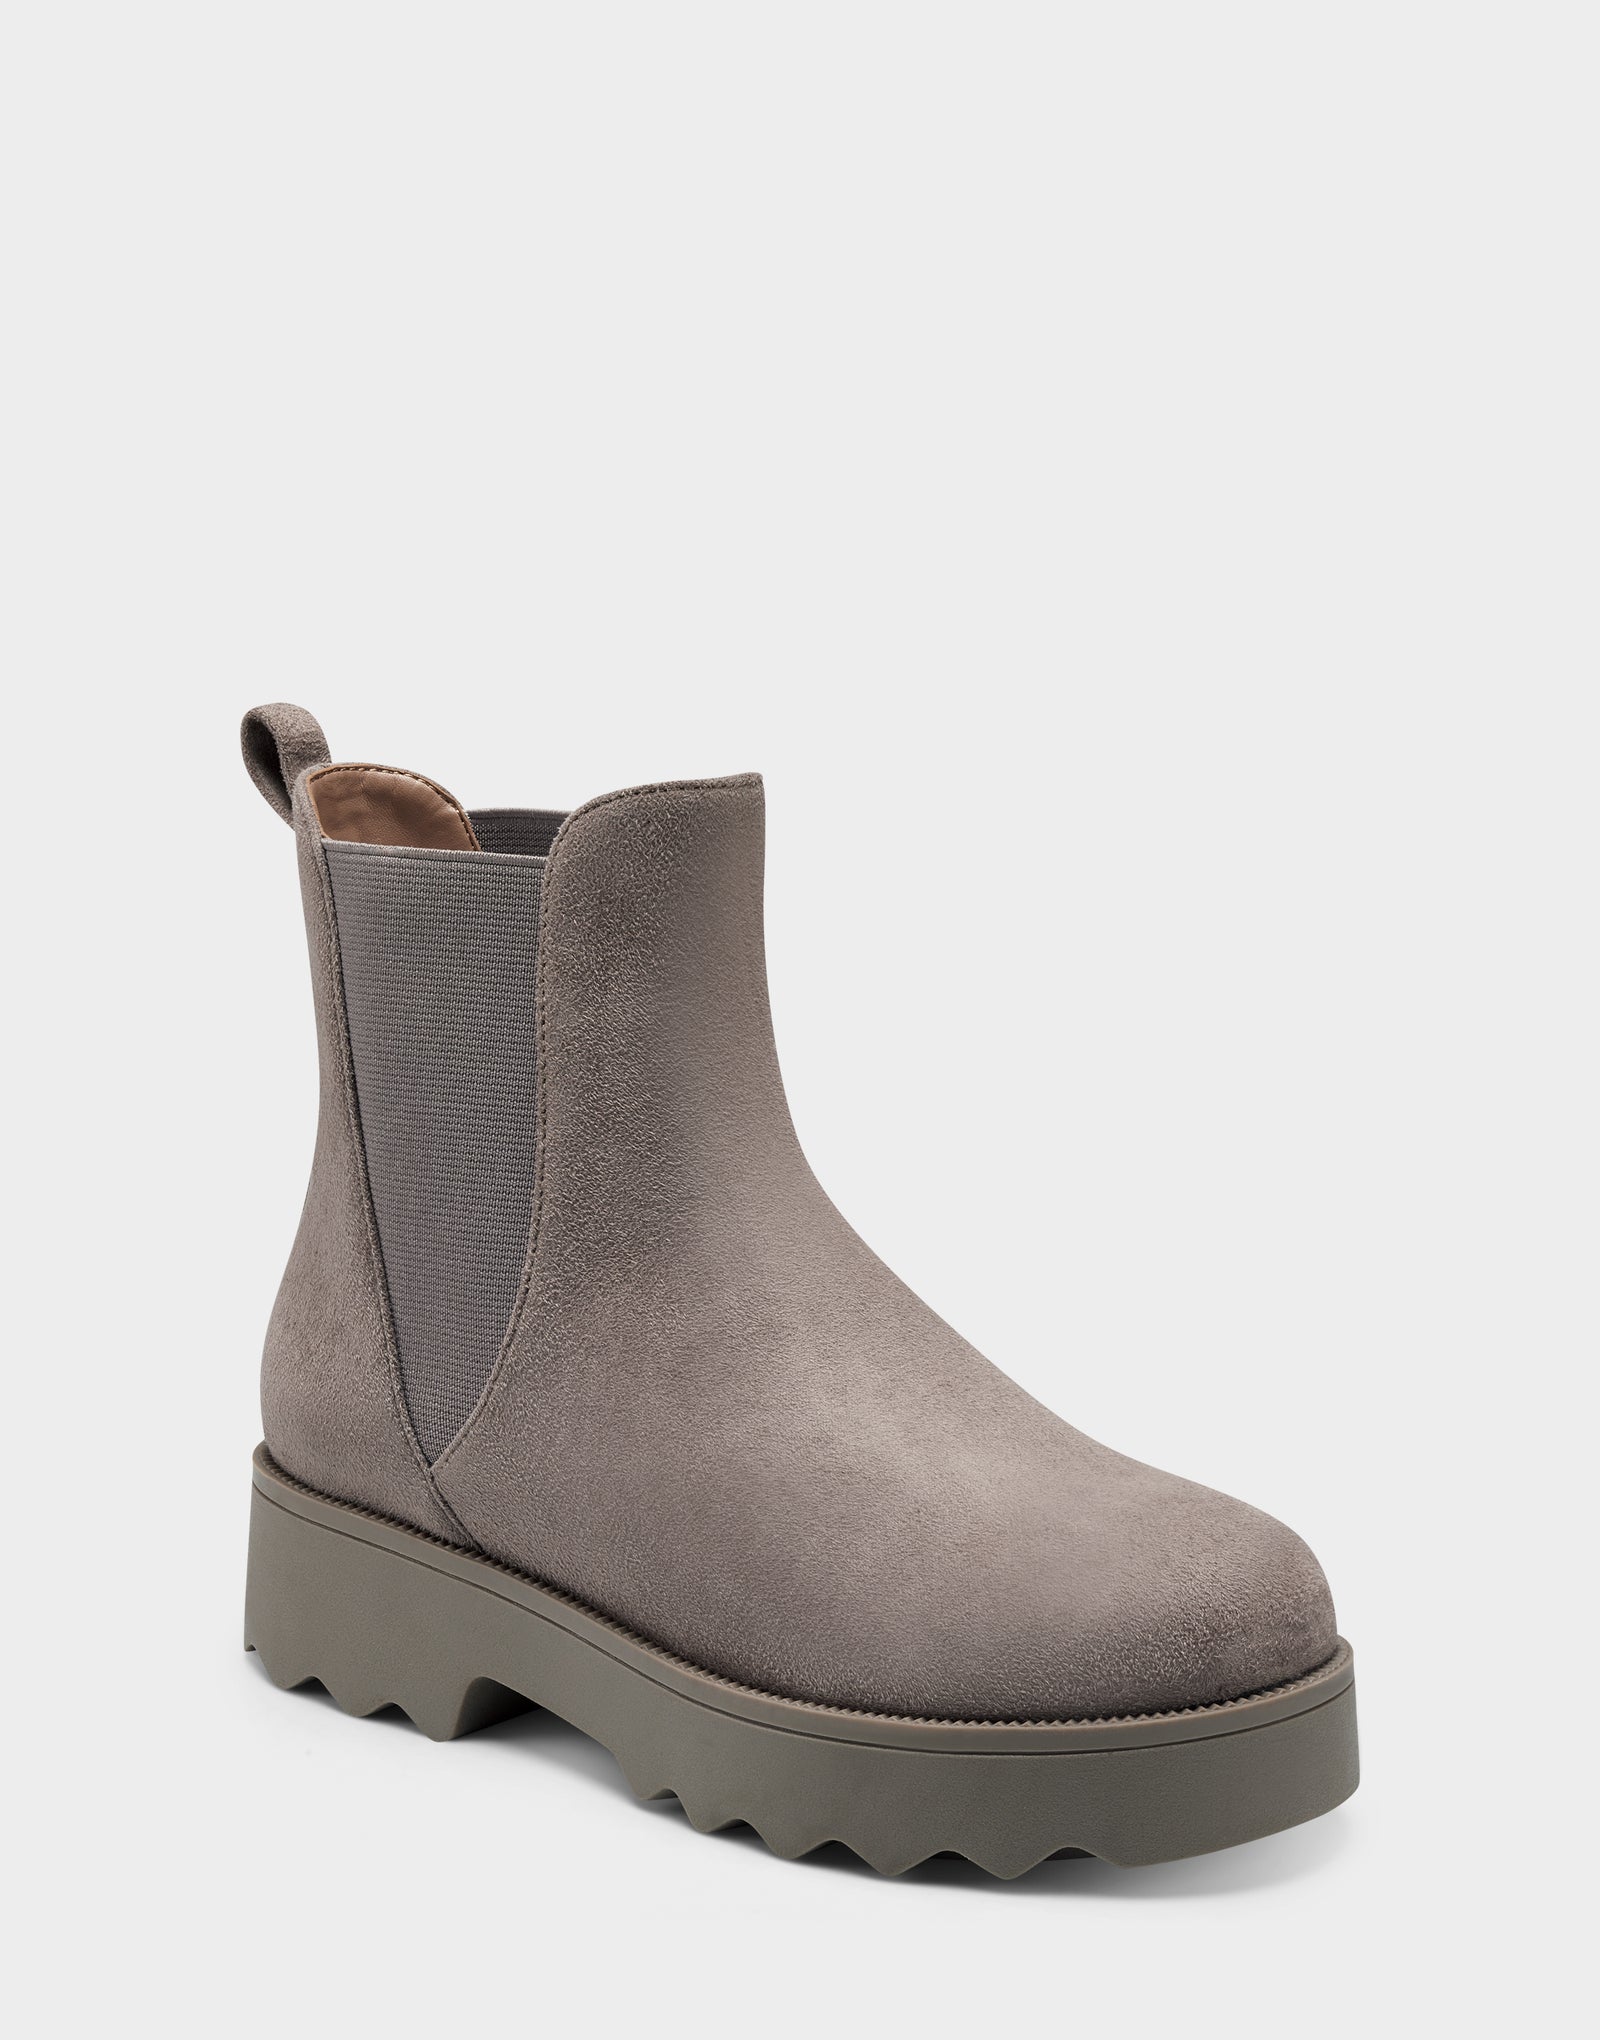 Girls Boot in Taupe